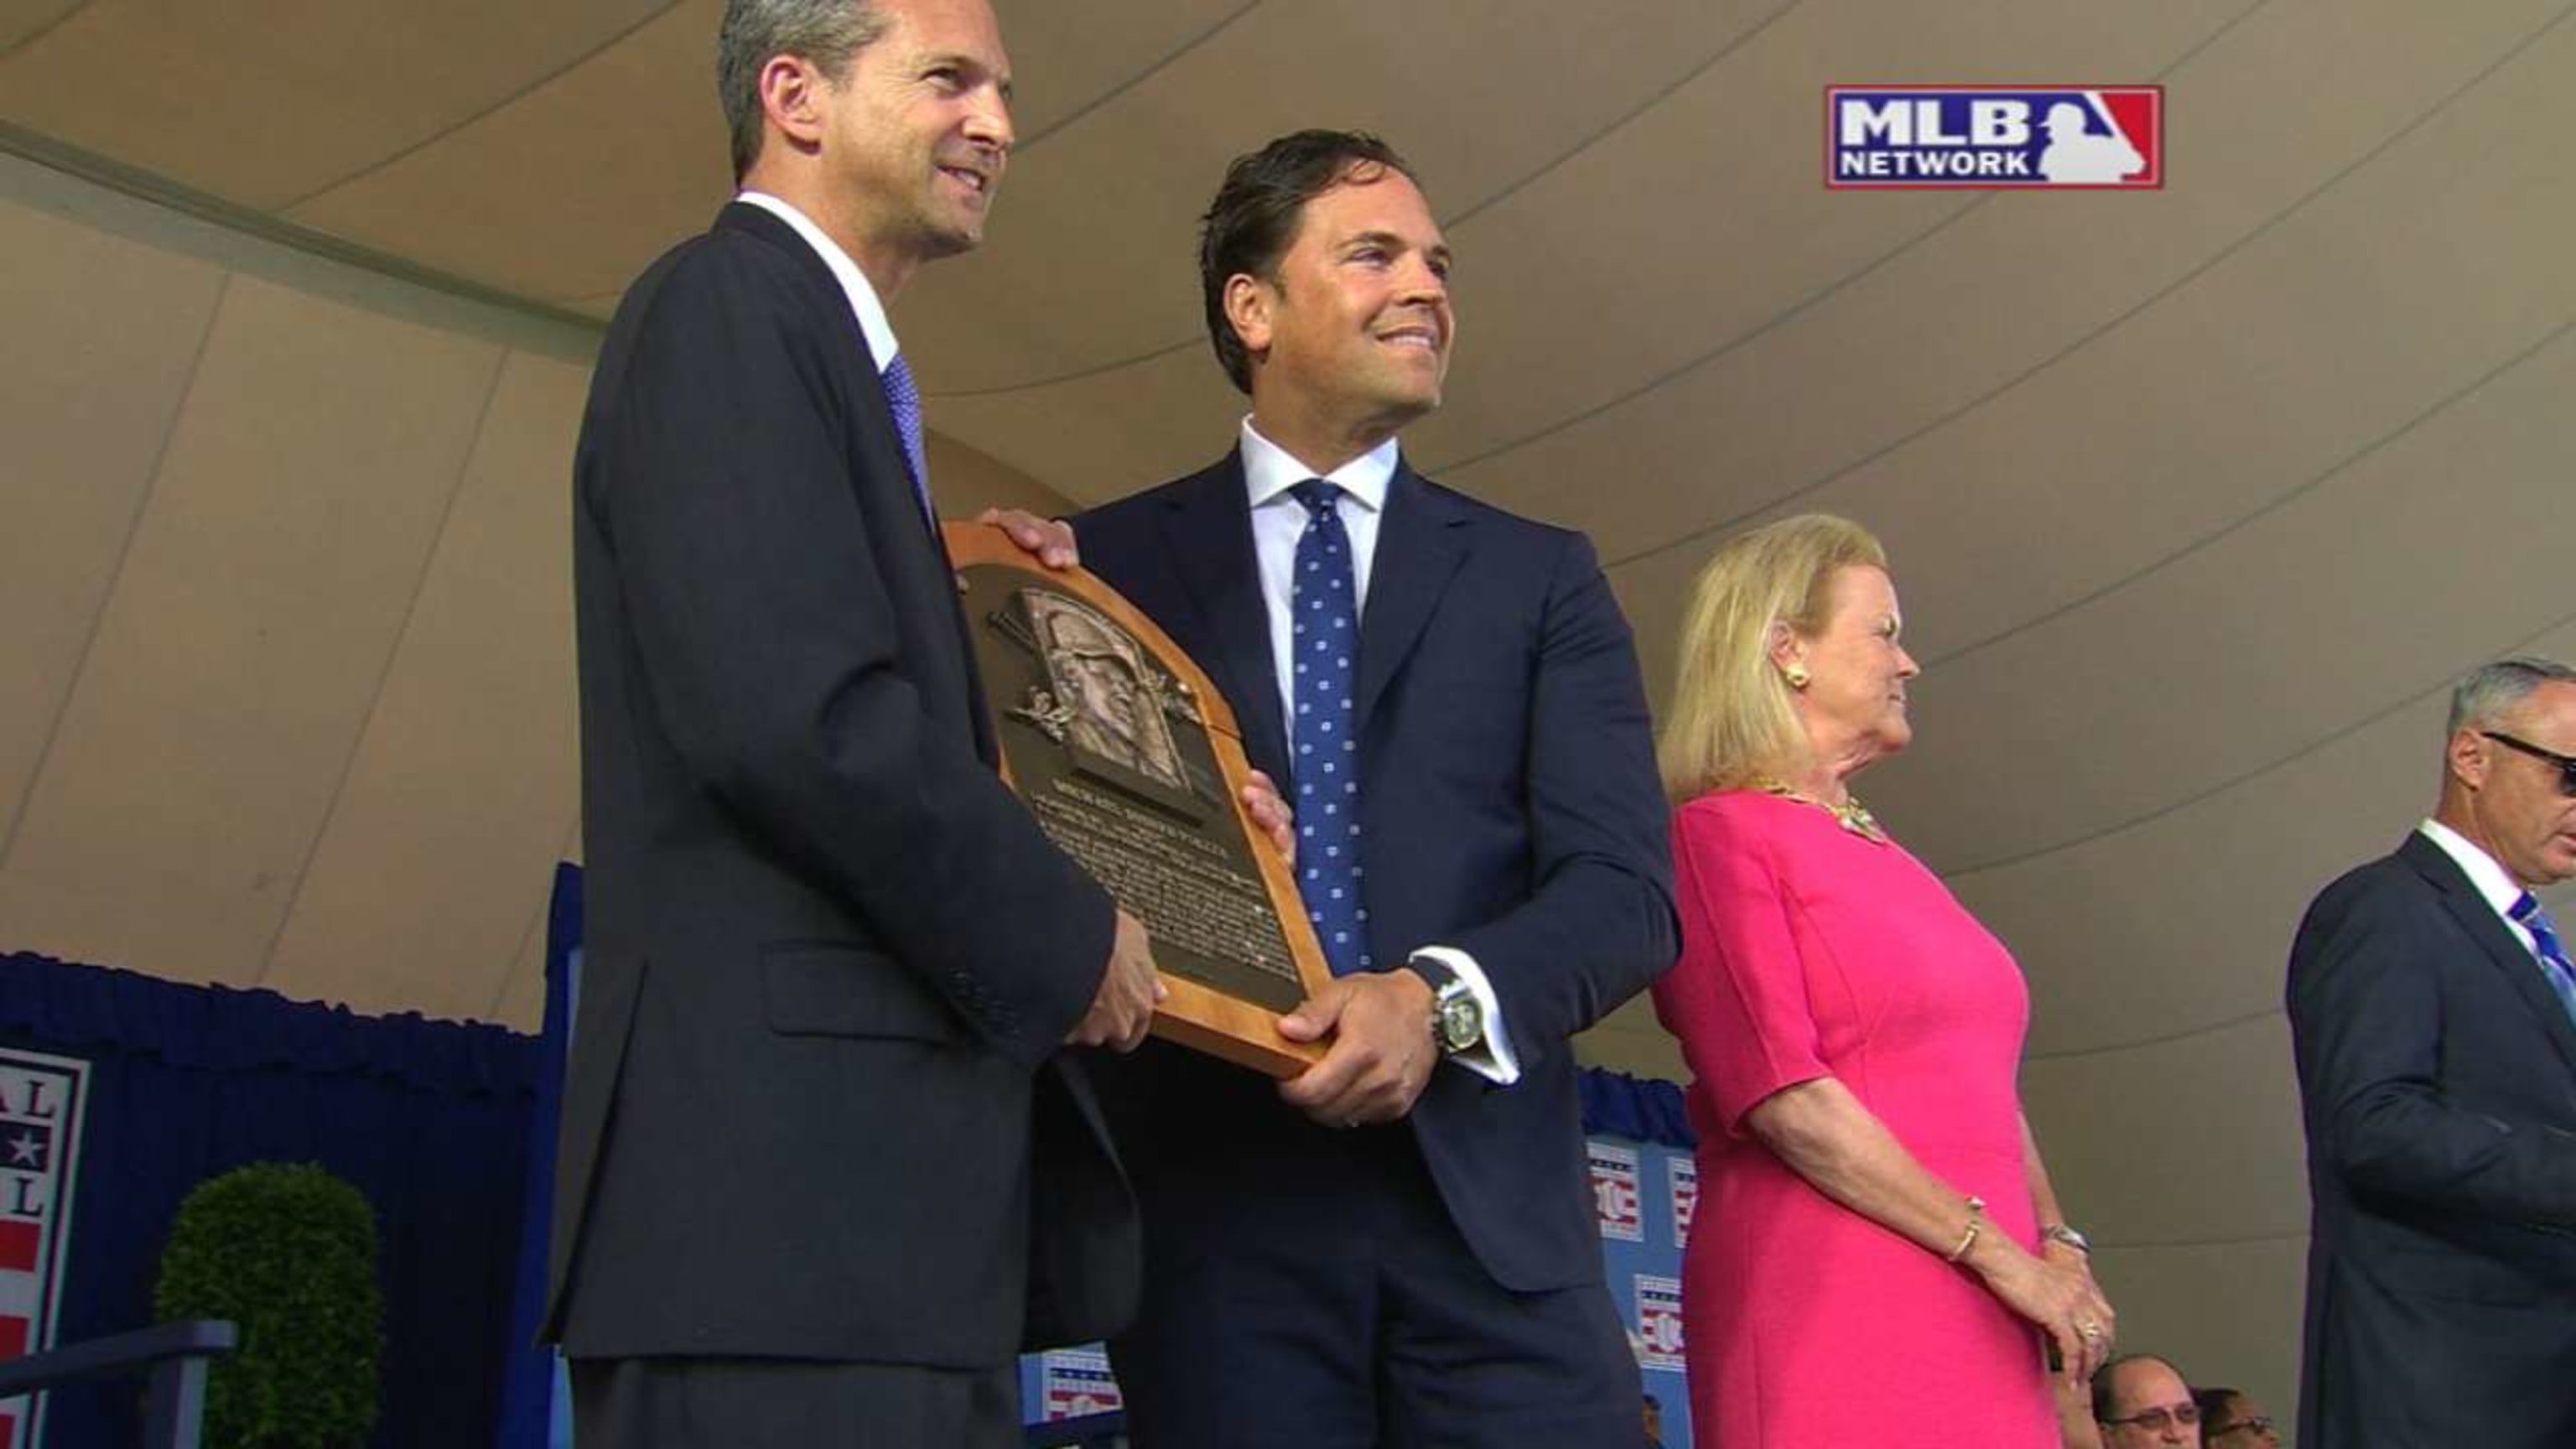 Norristown native Mike Piazza headed to the Hall of Fame